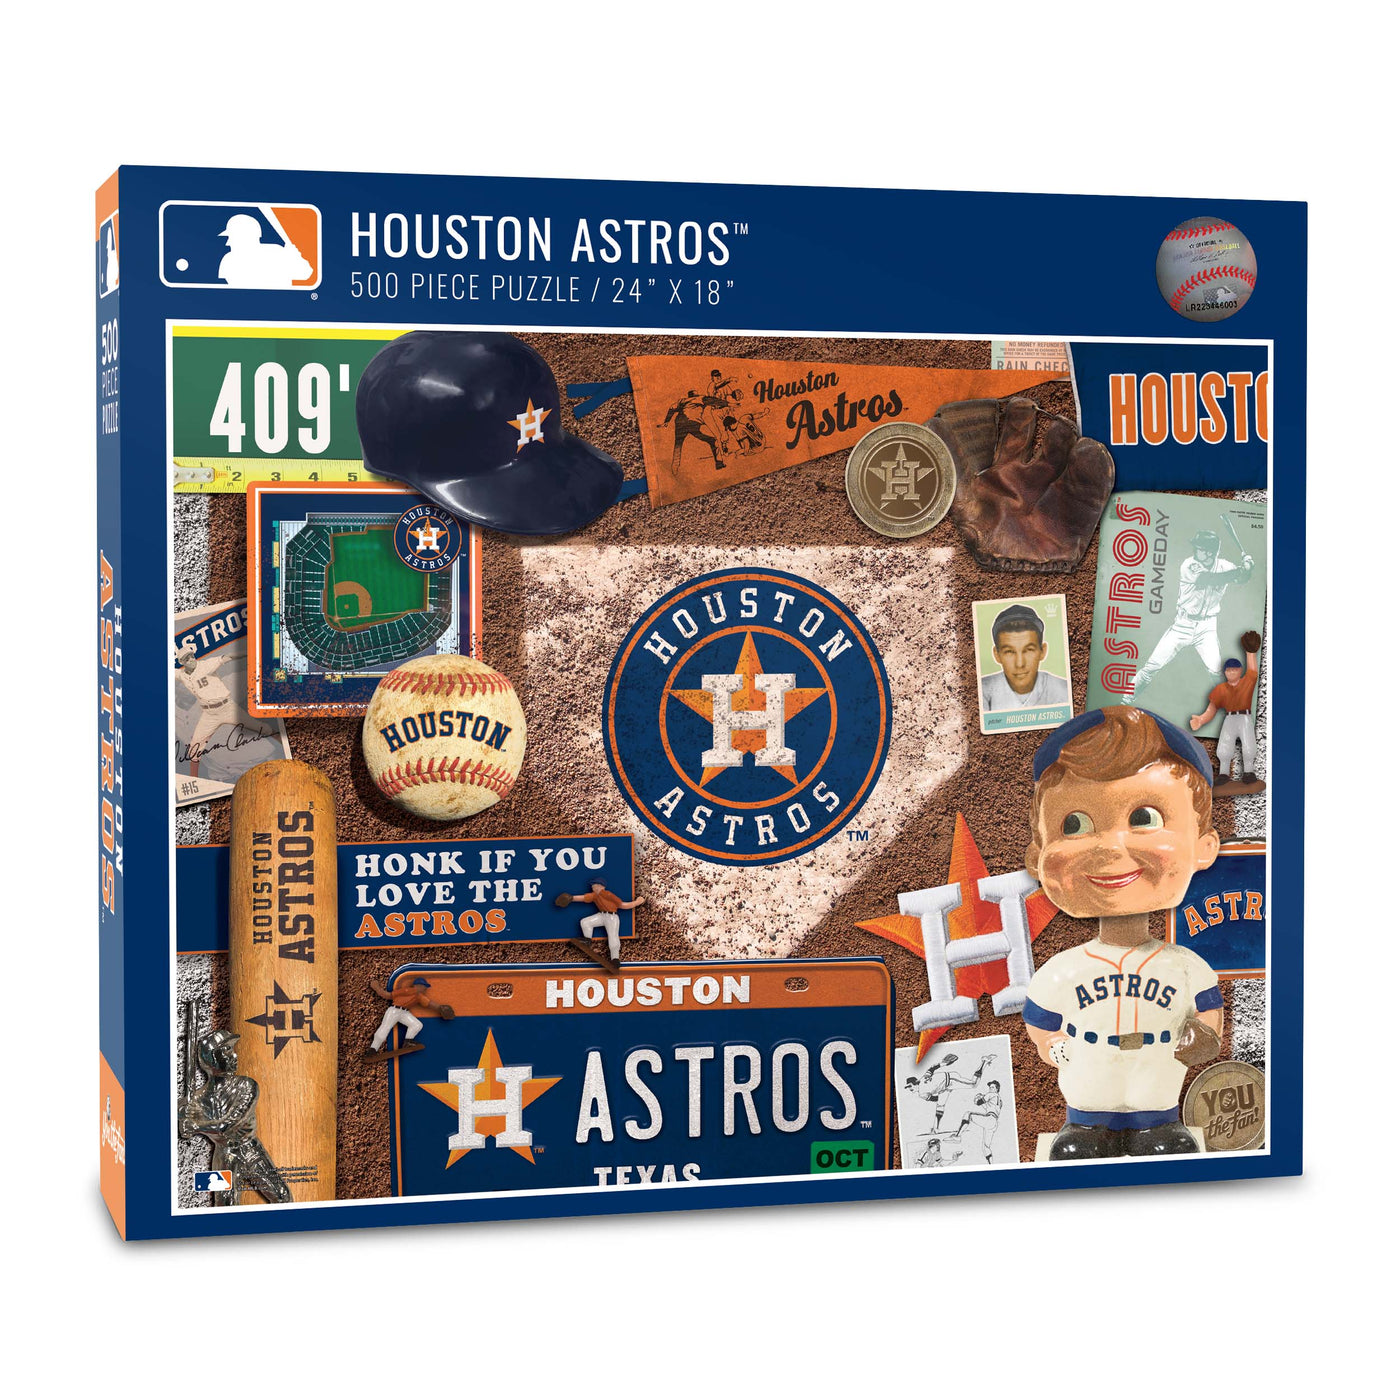  Houston Astros "Retro Series" Team Jigsaw Puzzle - Texas Time Gifts and Fine Art